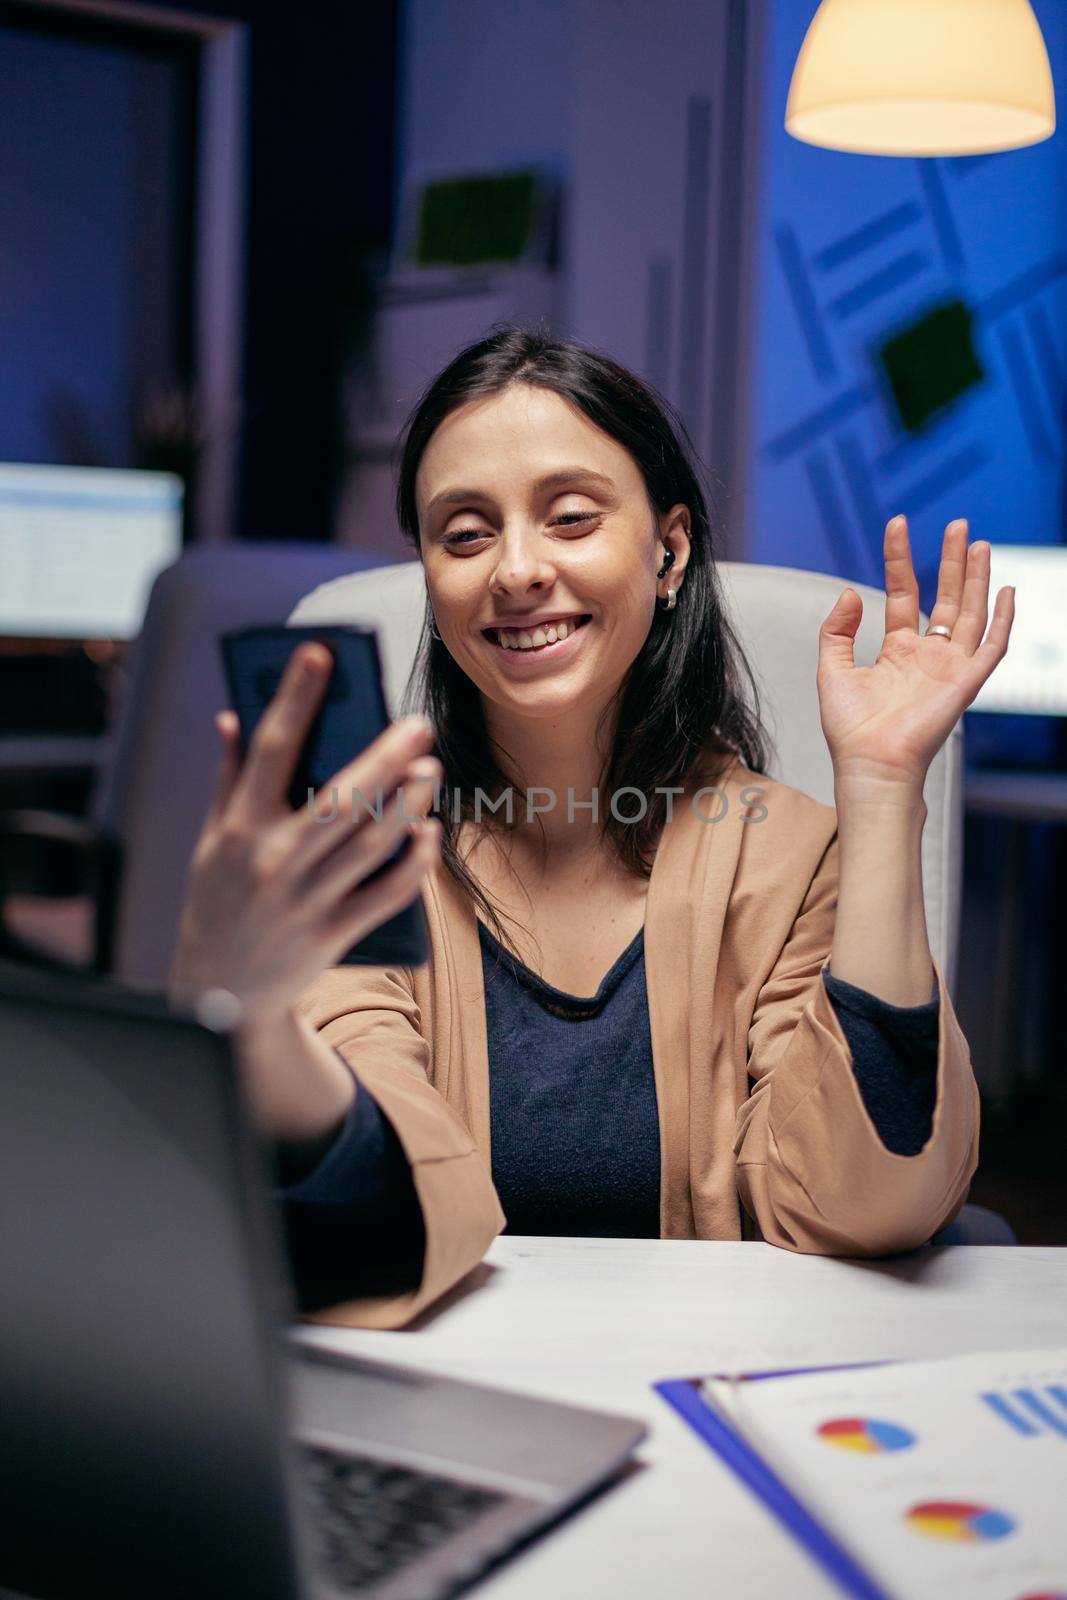 Saying hello in the course of teleconference with entrepreneurs doing overtime. Woman working on finance during a video conference with coworkers at night hours in the office.